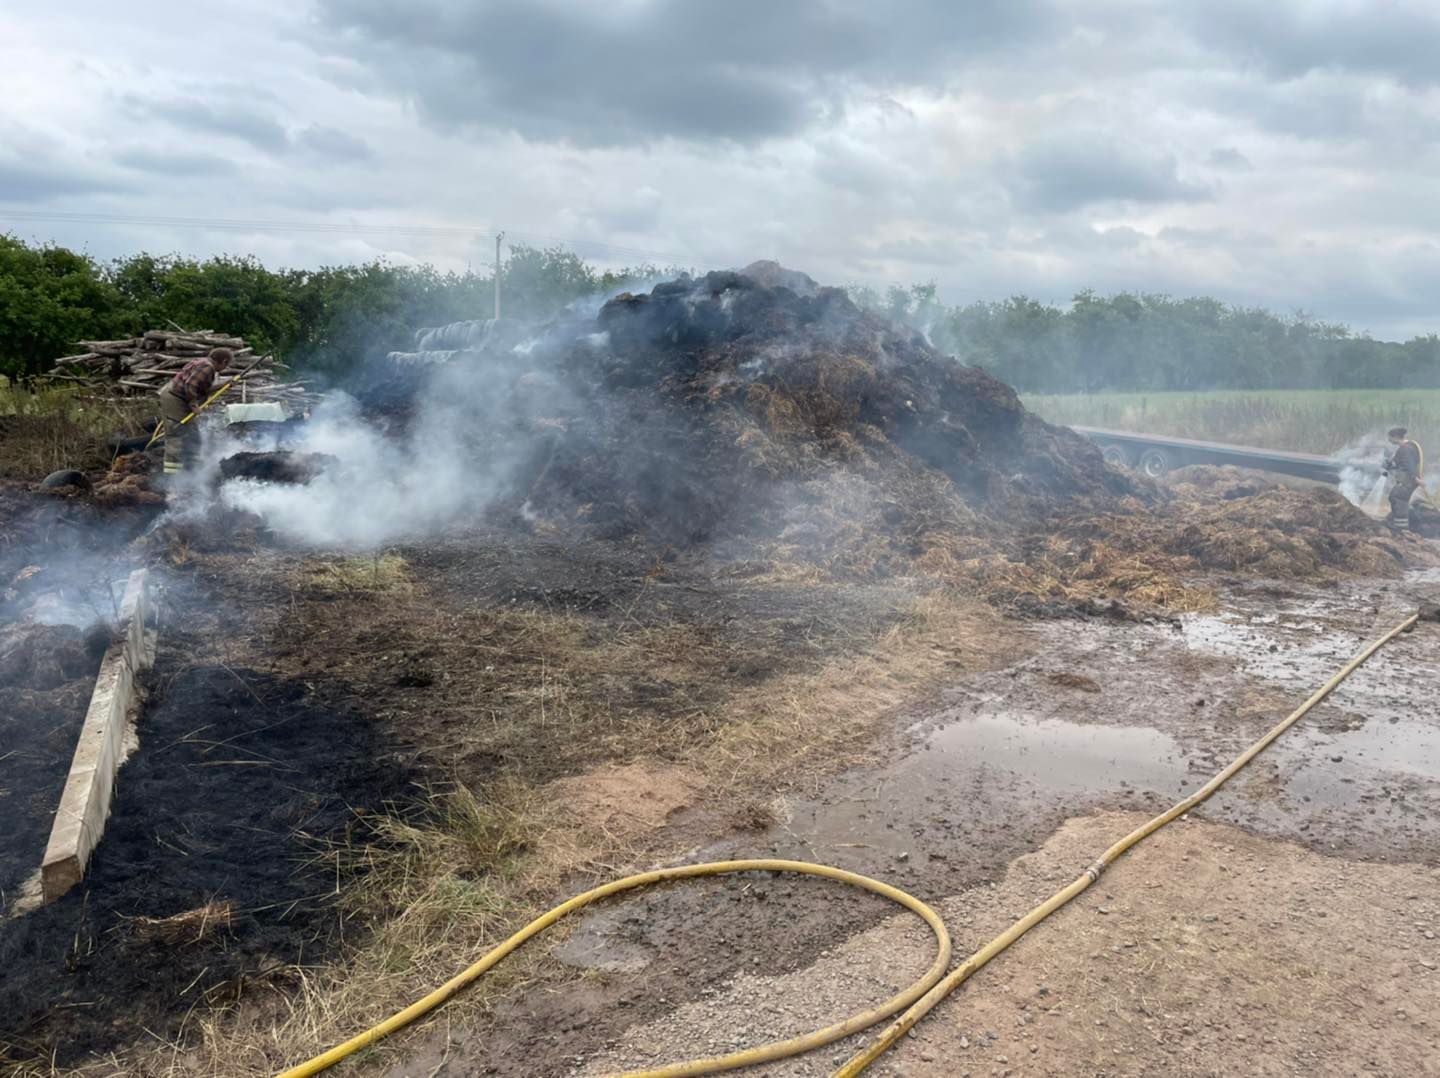 NEWS | Fire crews called to fire involving a large muck heap in Herefordshire